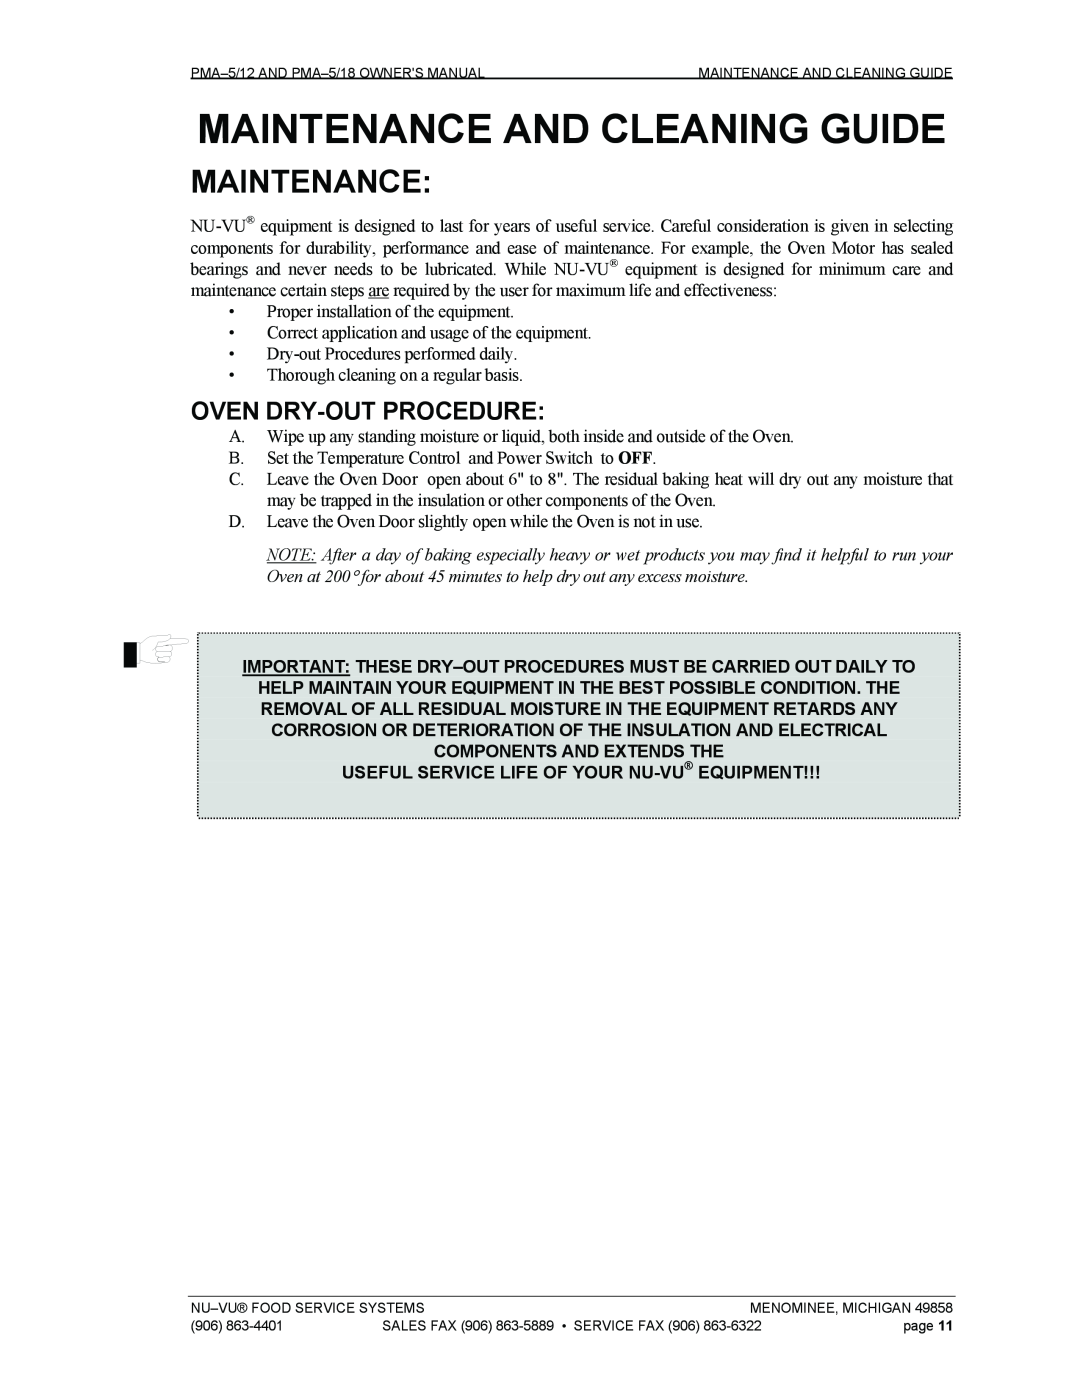 Nu-Vu PMA -5/12 Oven Dry-Outprocedure, Maintenance And Cleaning Guide, Useful Service Life Of Your Nu-Vu Equipment 